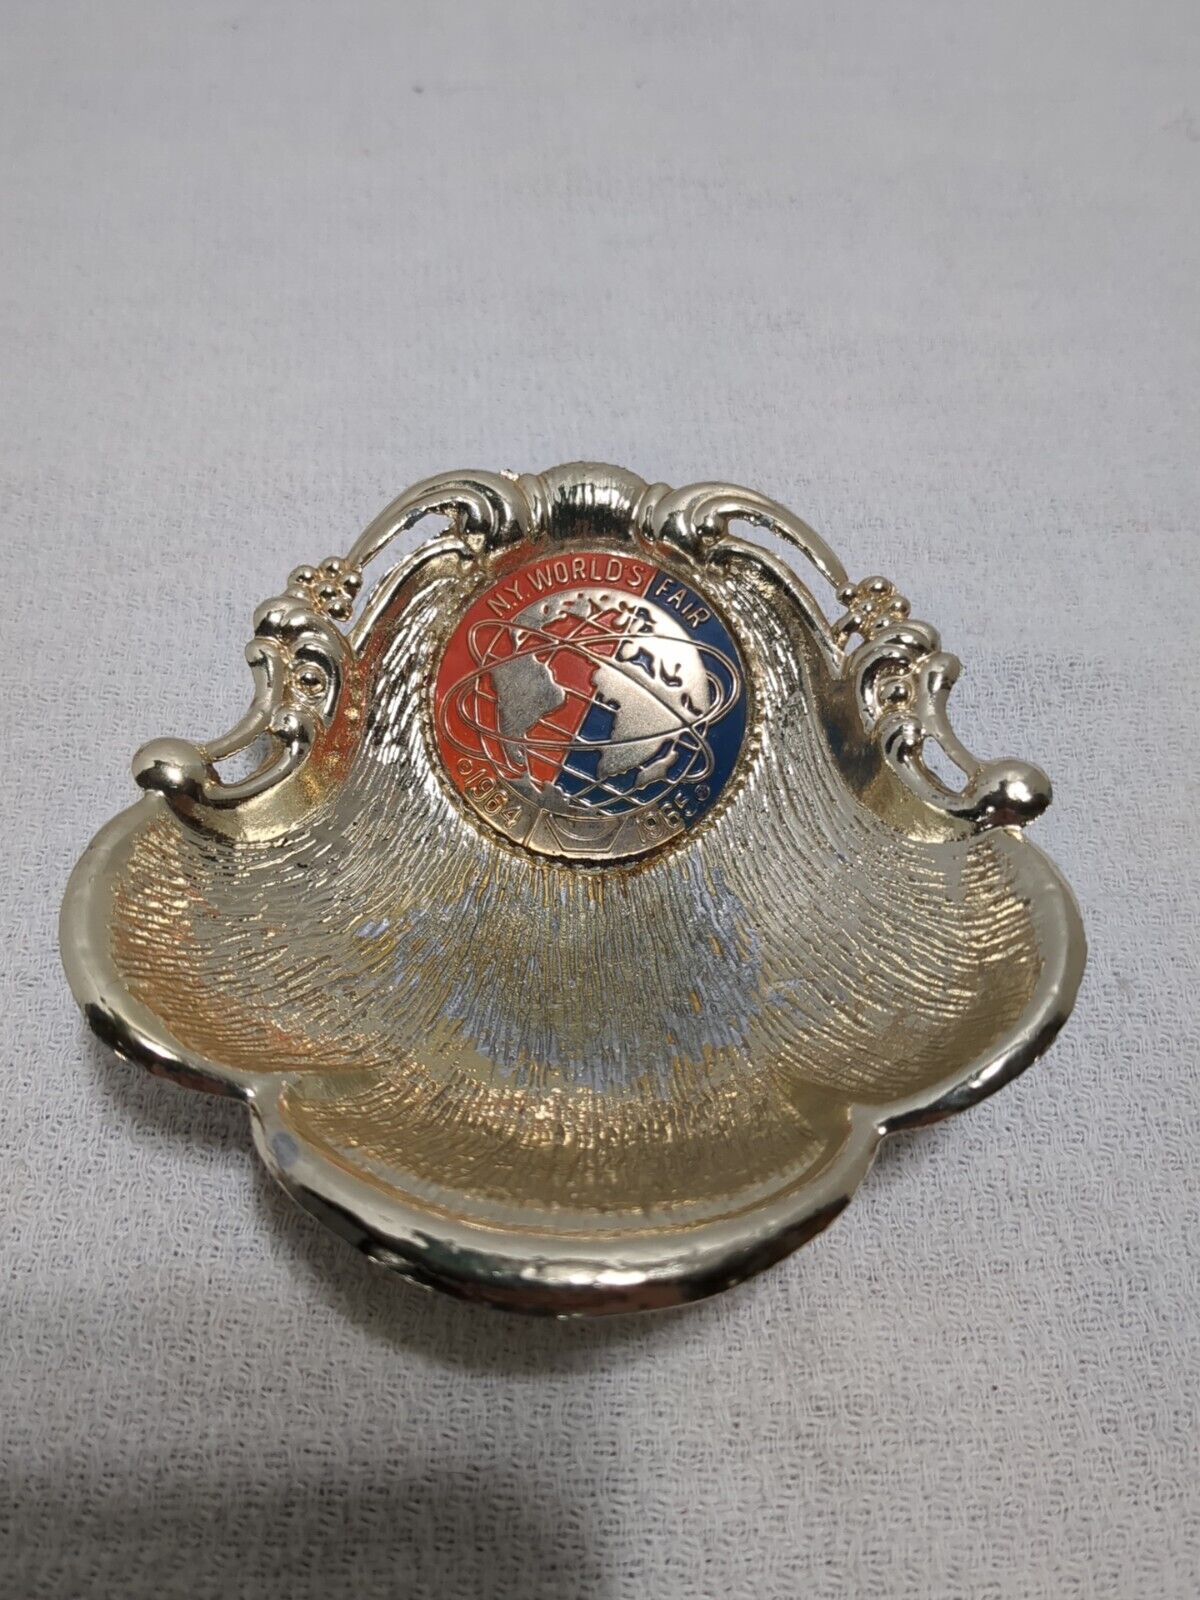 1964-65 N.Y. World\'s Fair Metal Trinket Tray with Unisphere Image Red And Blue